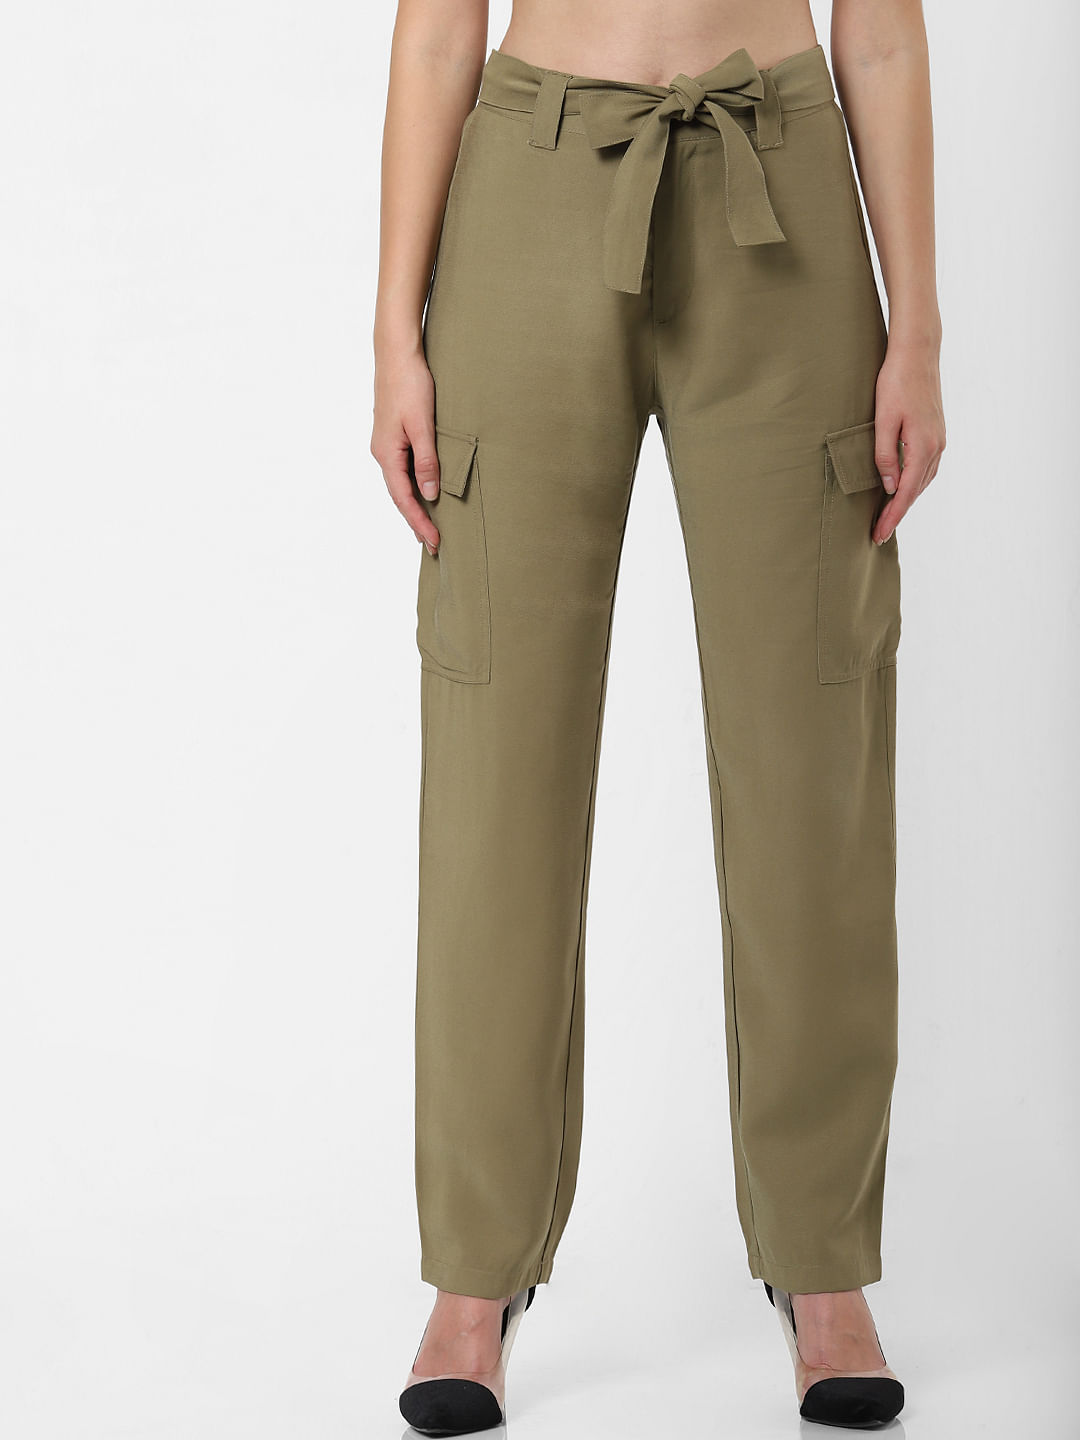 Buy Green Trousers & Pants for Women by WUXI Online | Ajio.com